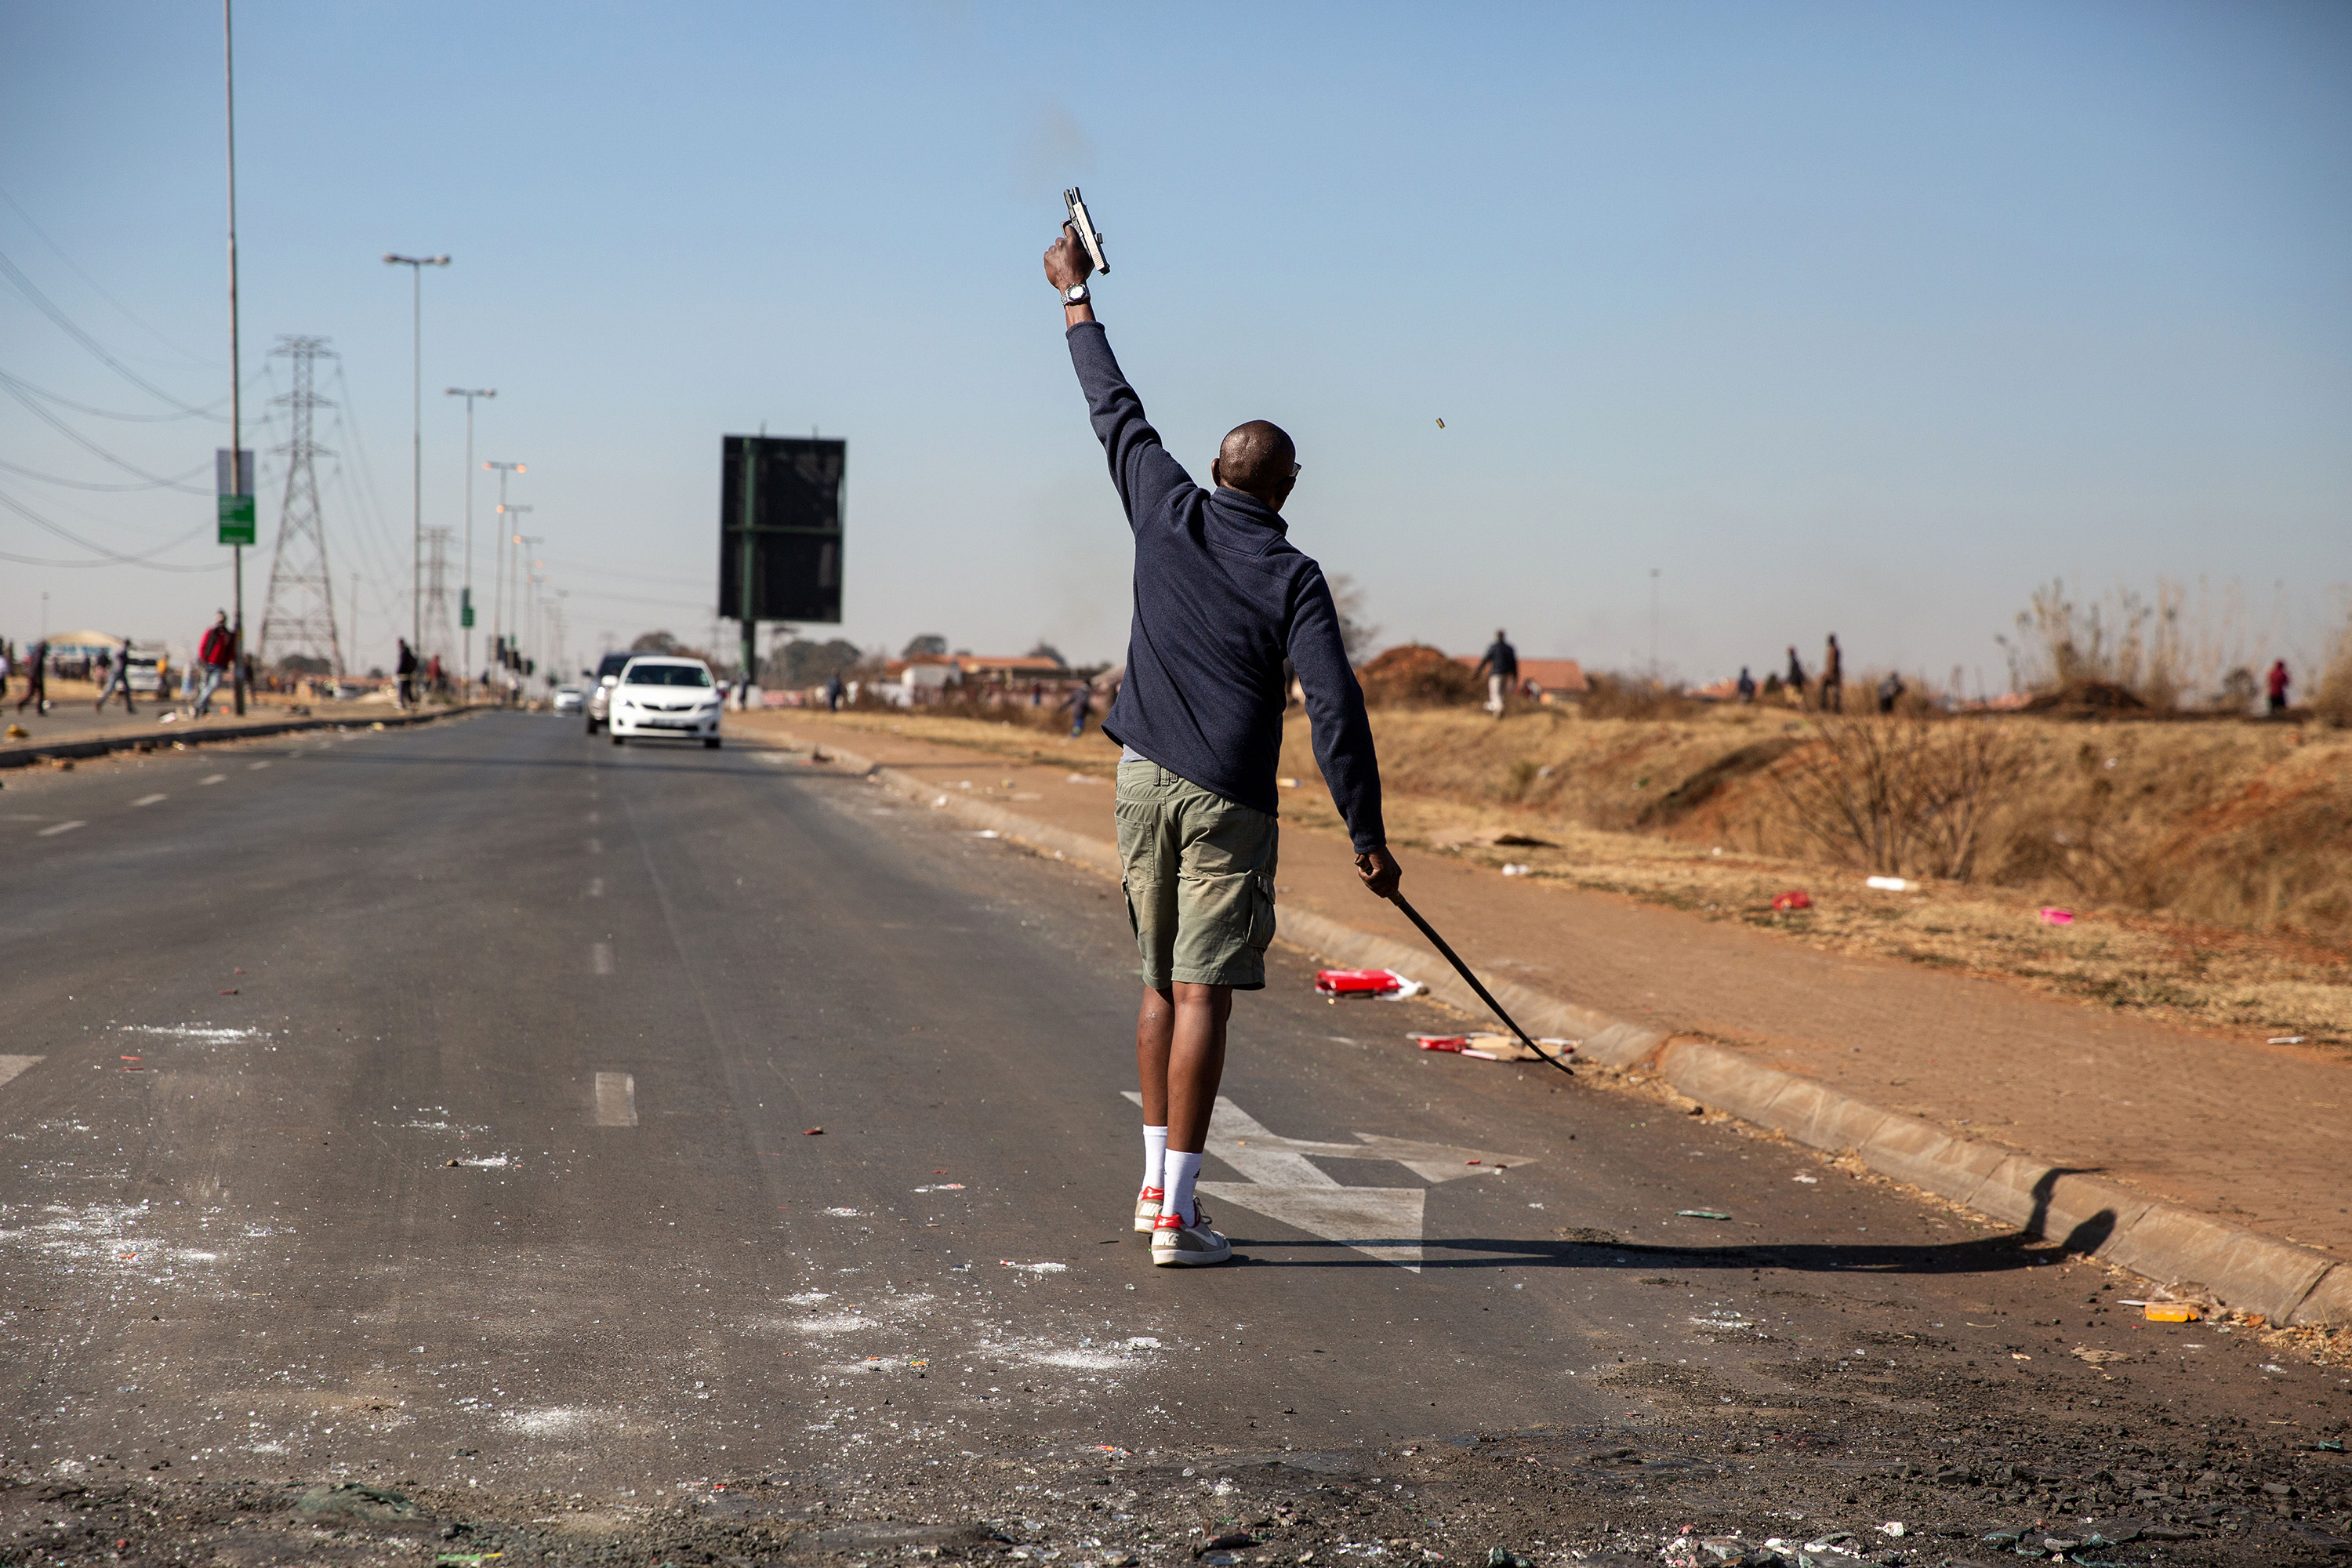 a person shoots a weapon into the air on a road in south africa.